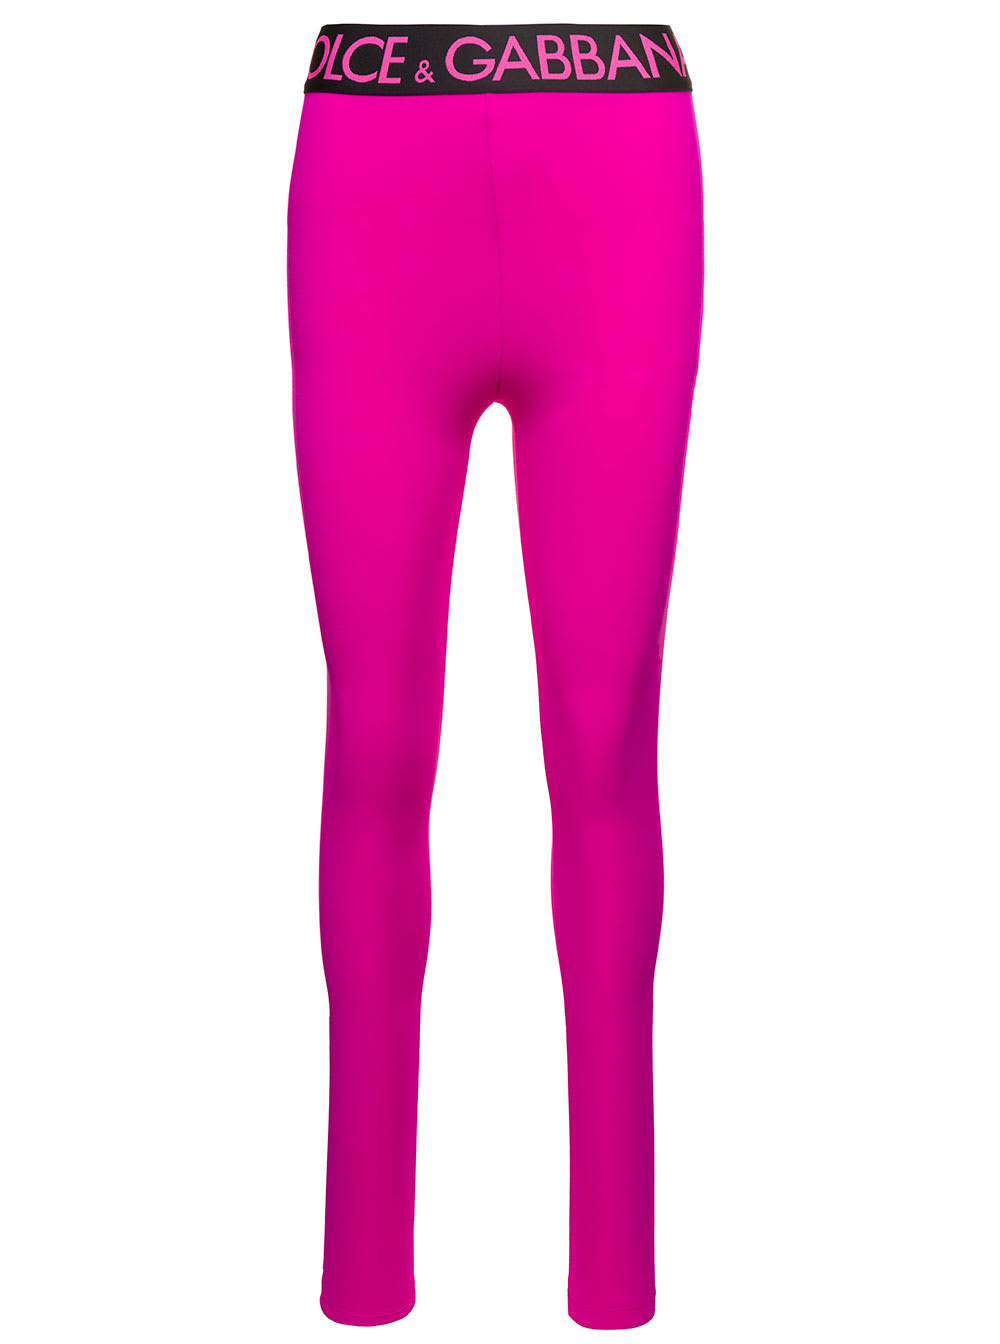 DOLCE & GABBANA FUCHSIA LEGGINGS WITH BRANDED BANDS IN STRETCH POLYAMIDE WOMAN